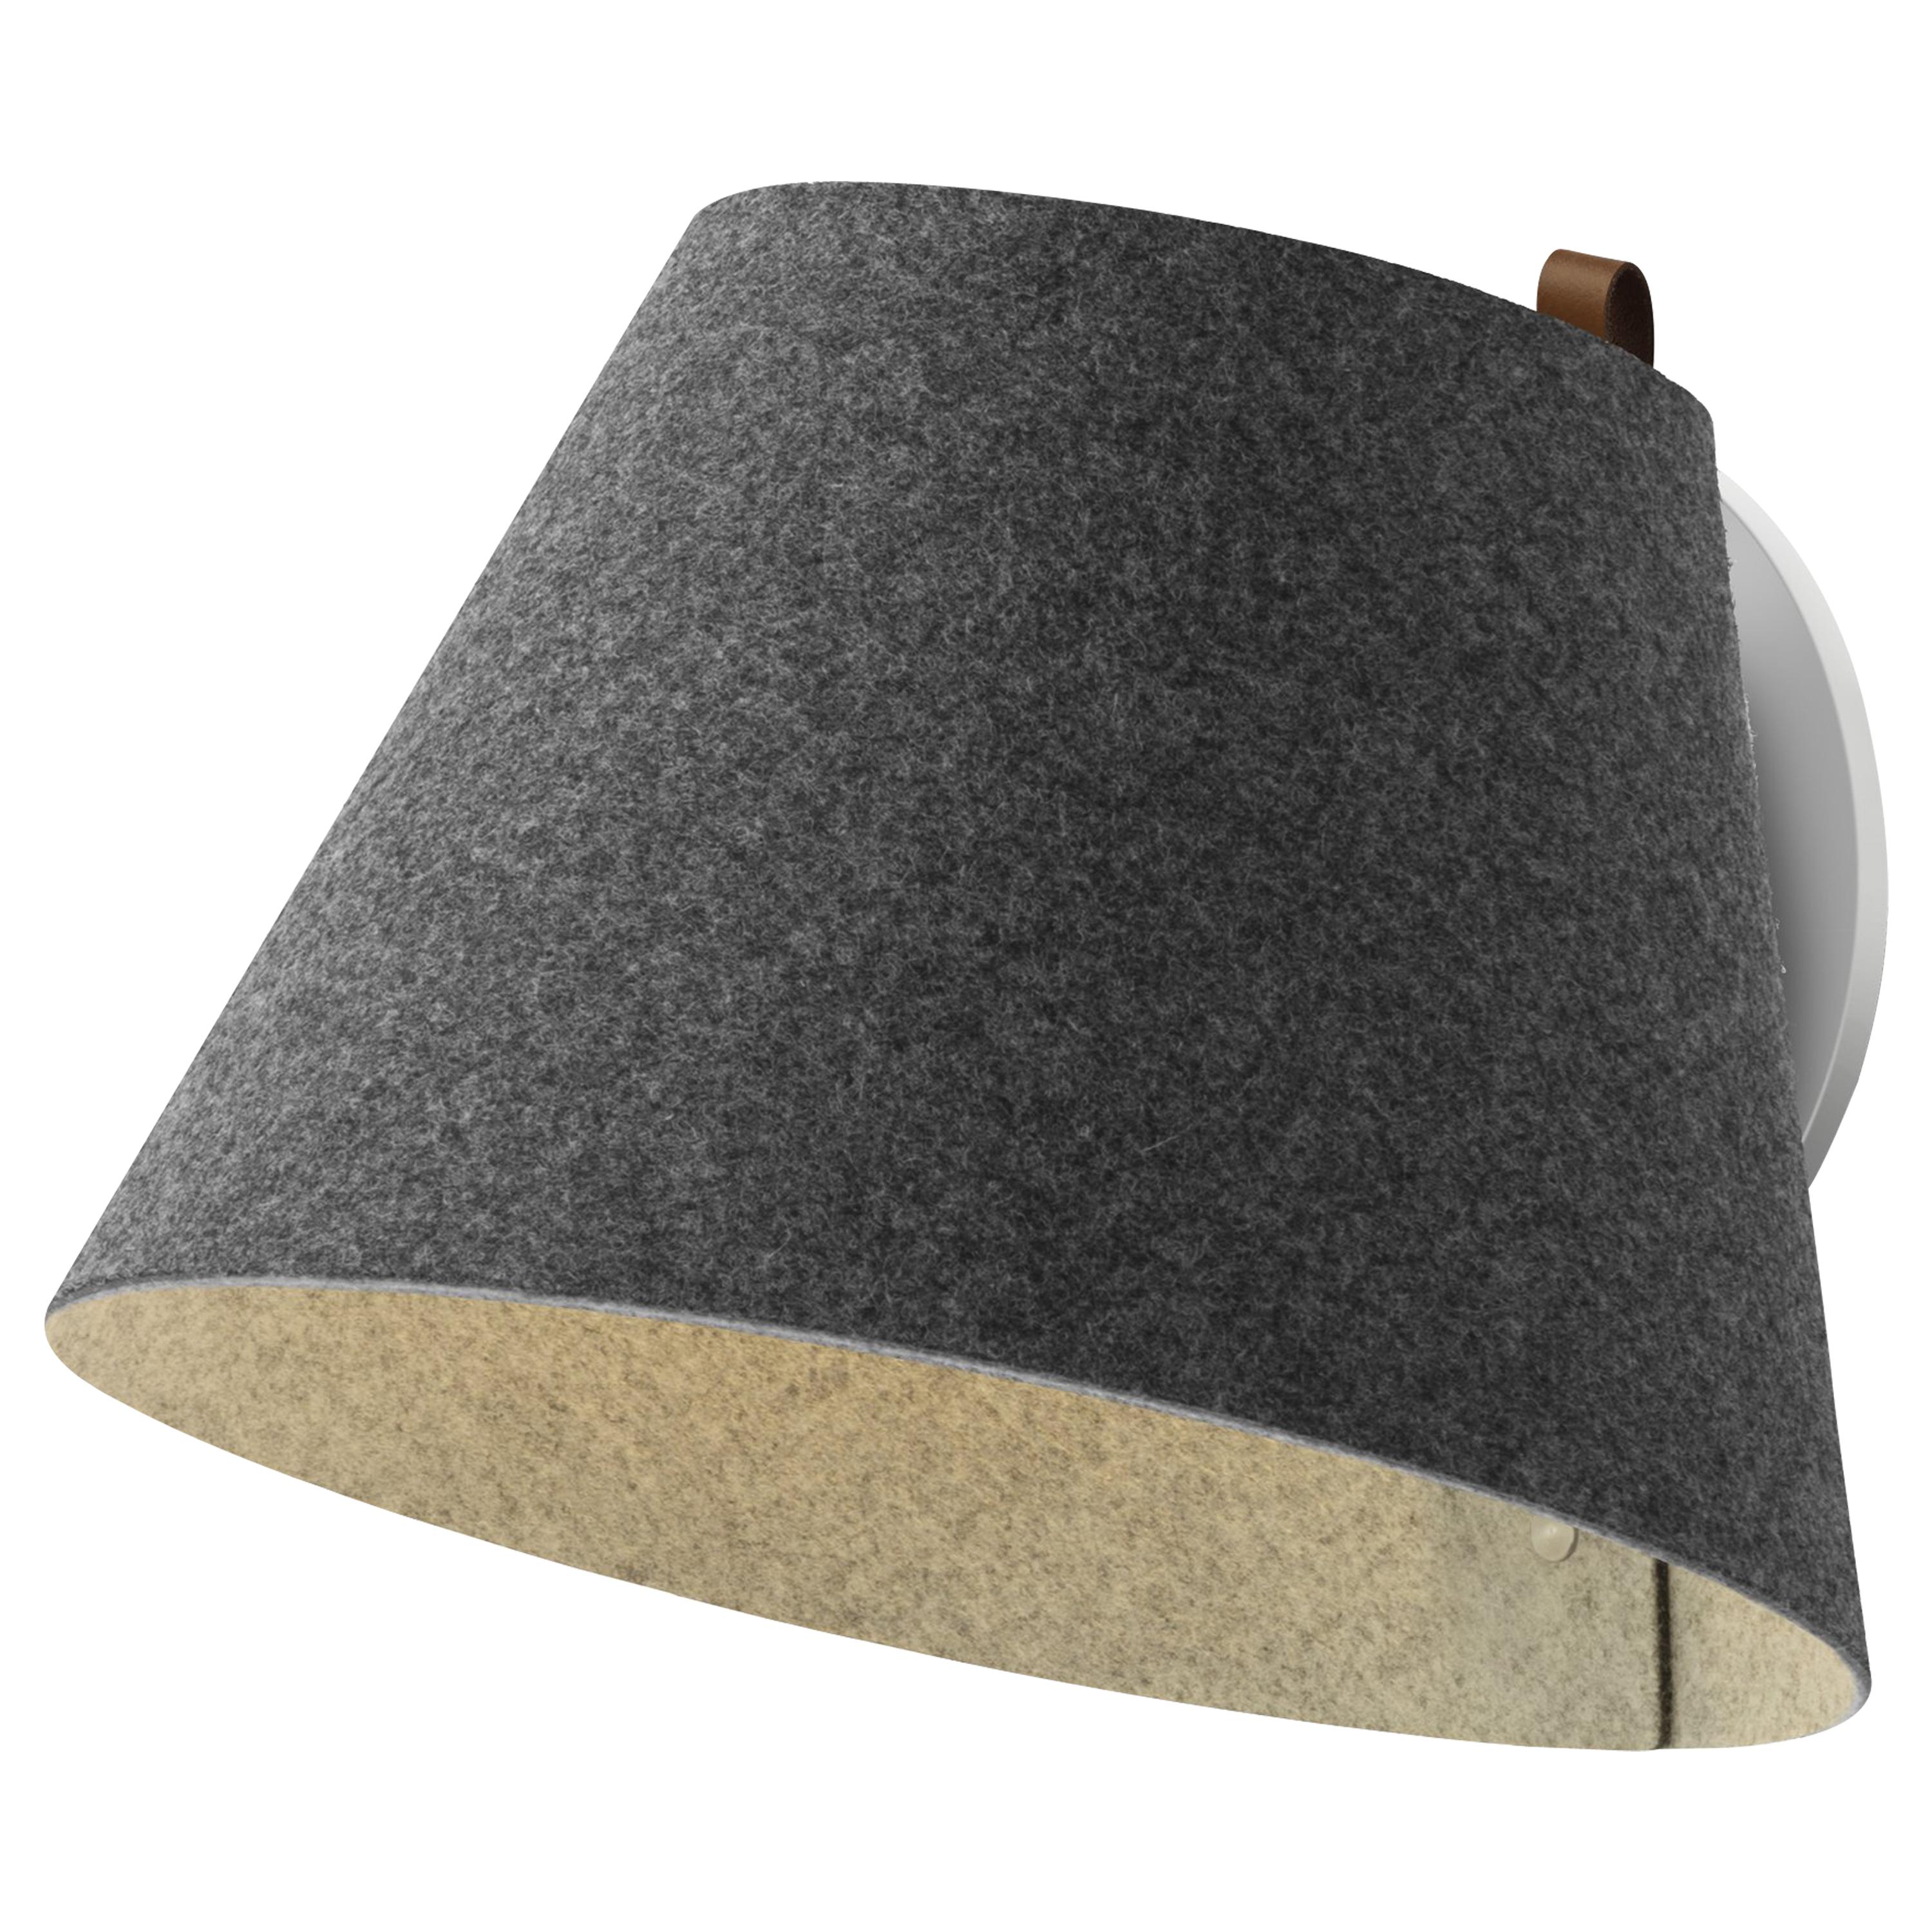 Lana Large Wall Light in Charcoal & Grey by Pablo Designs